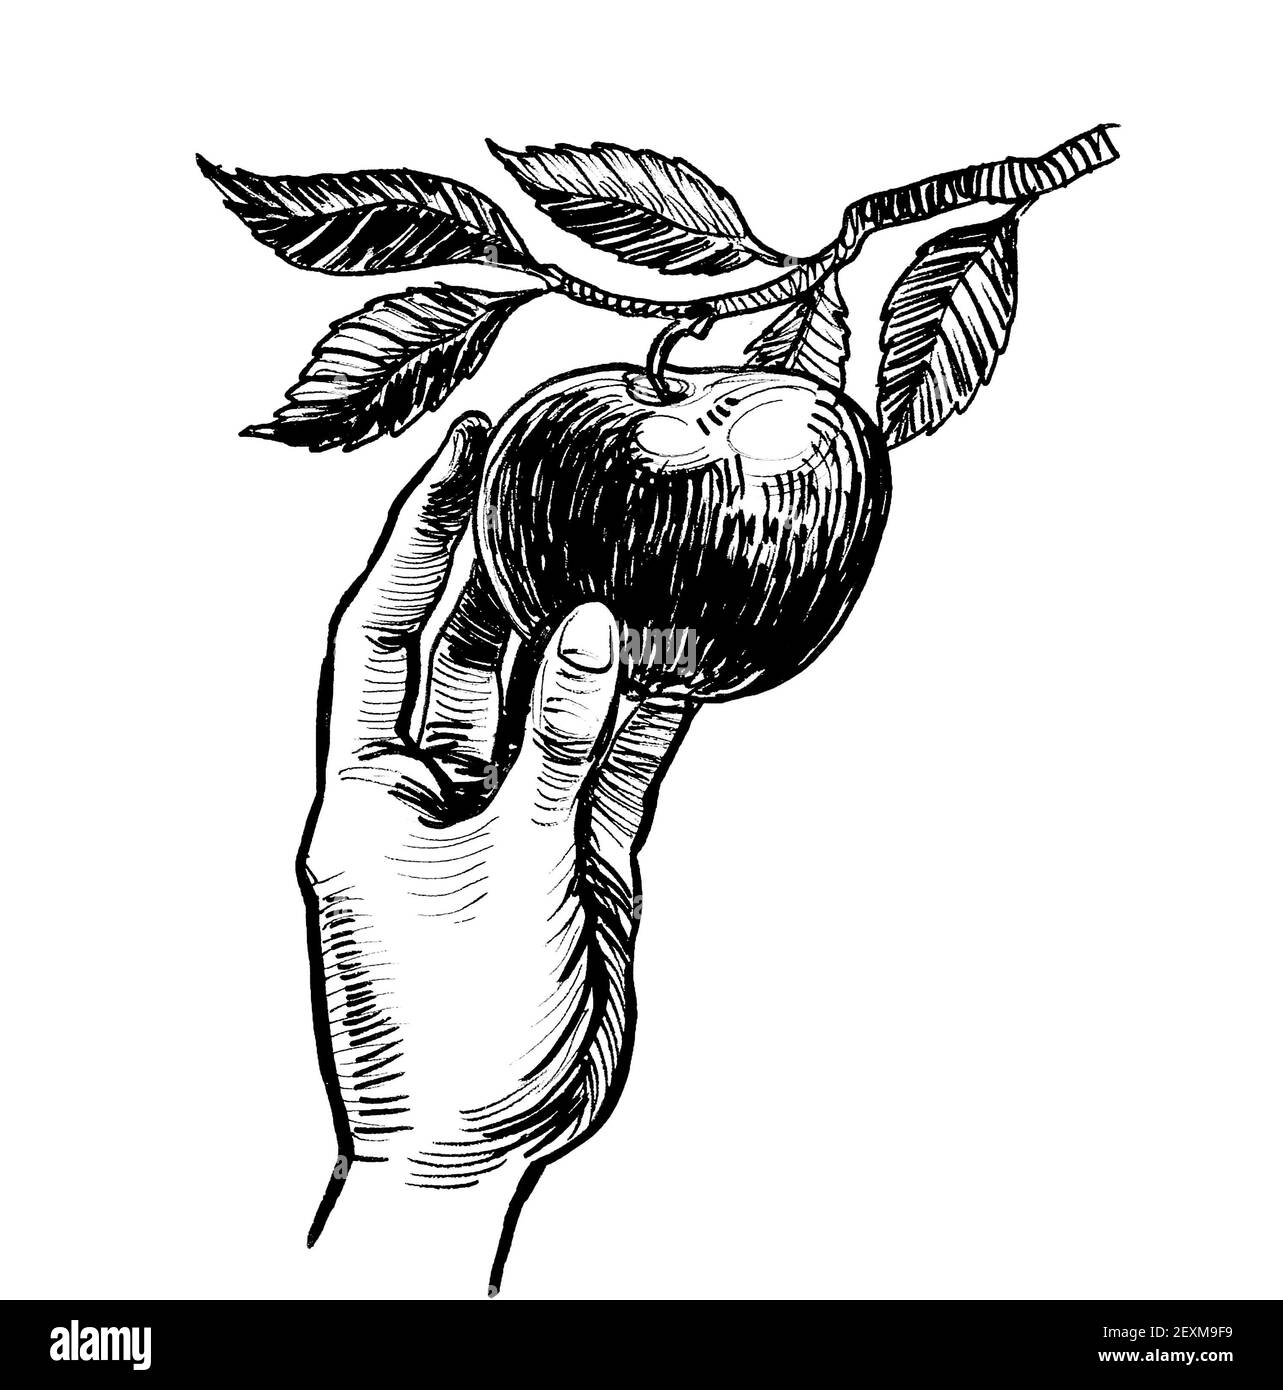 Hand picking apple fruit. Ink black and white drawing Stock Photo Alamy